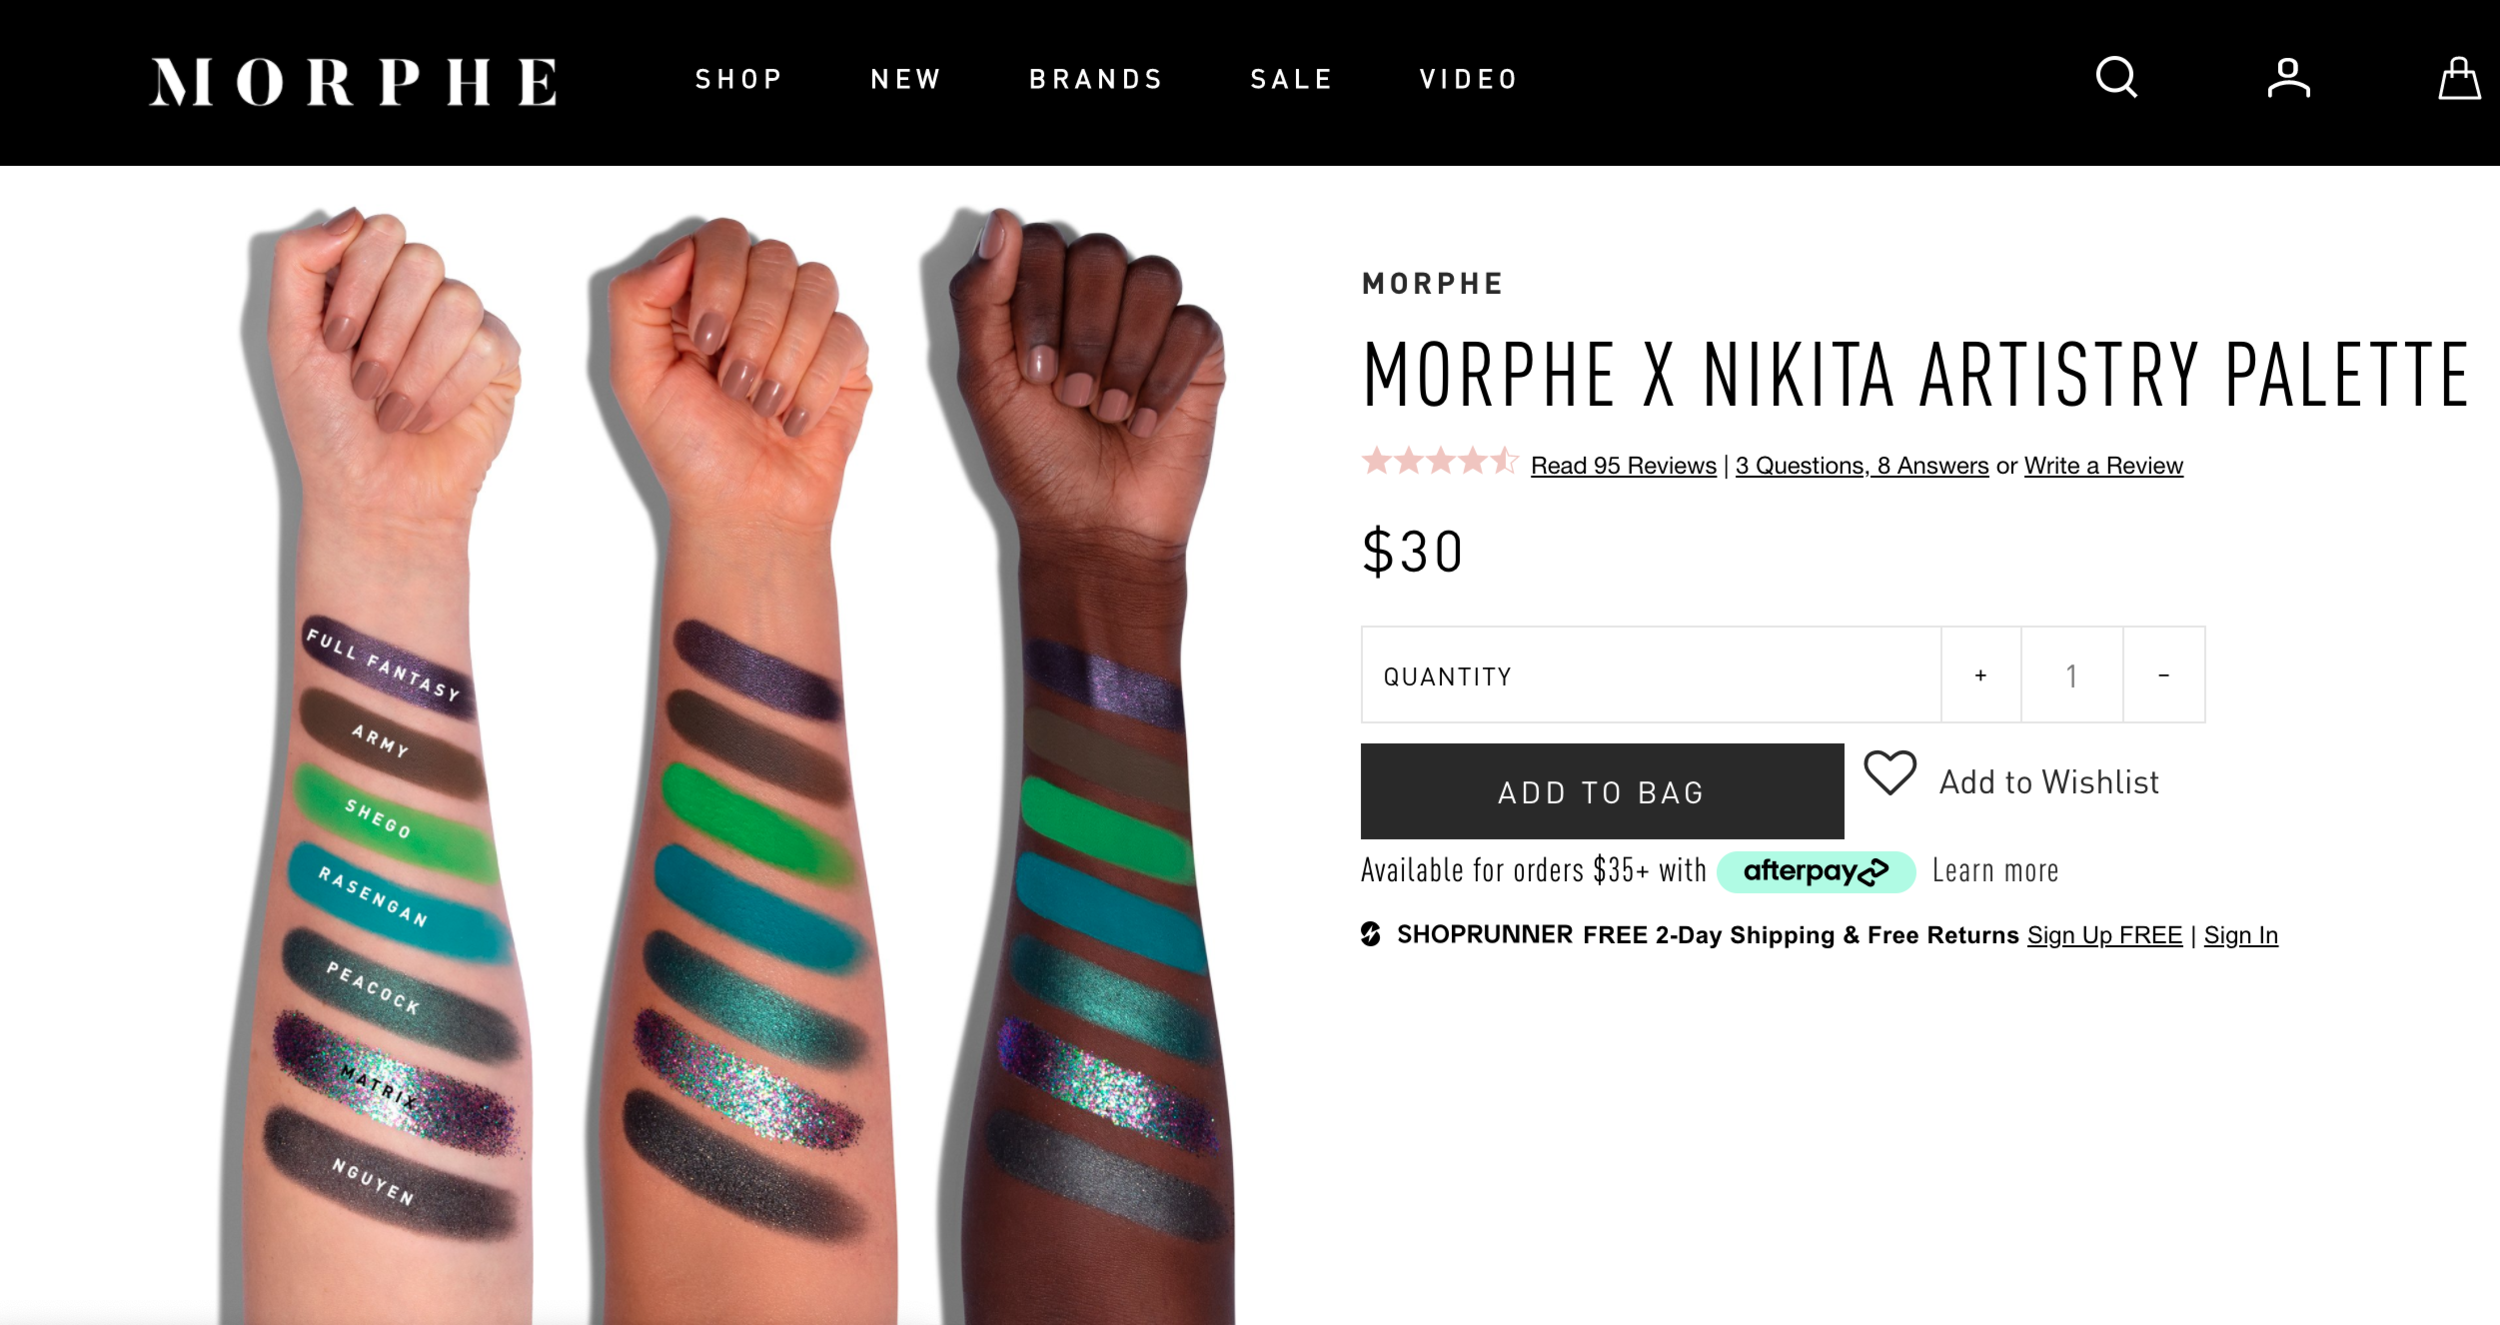 Morphe x Nikita Artistry Palette green Swatches.png